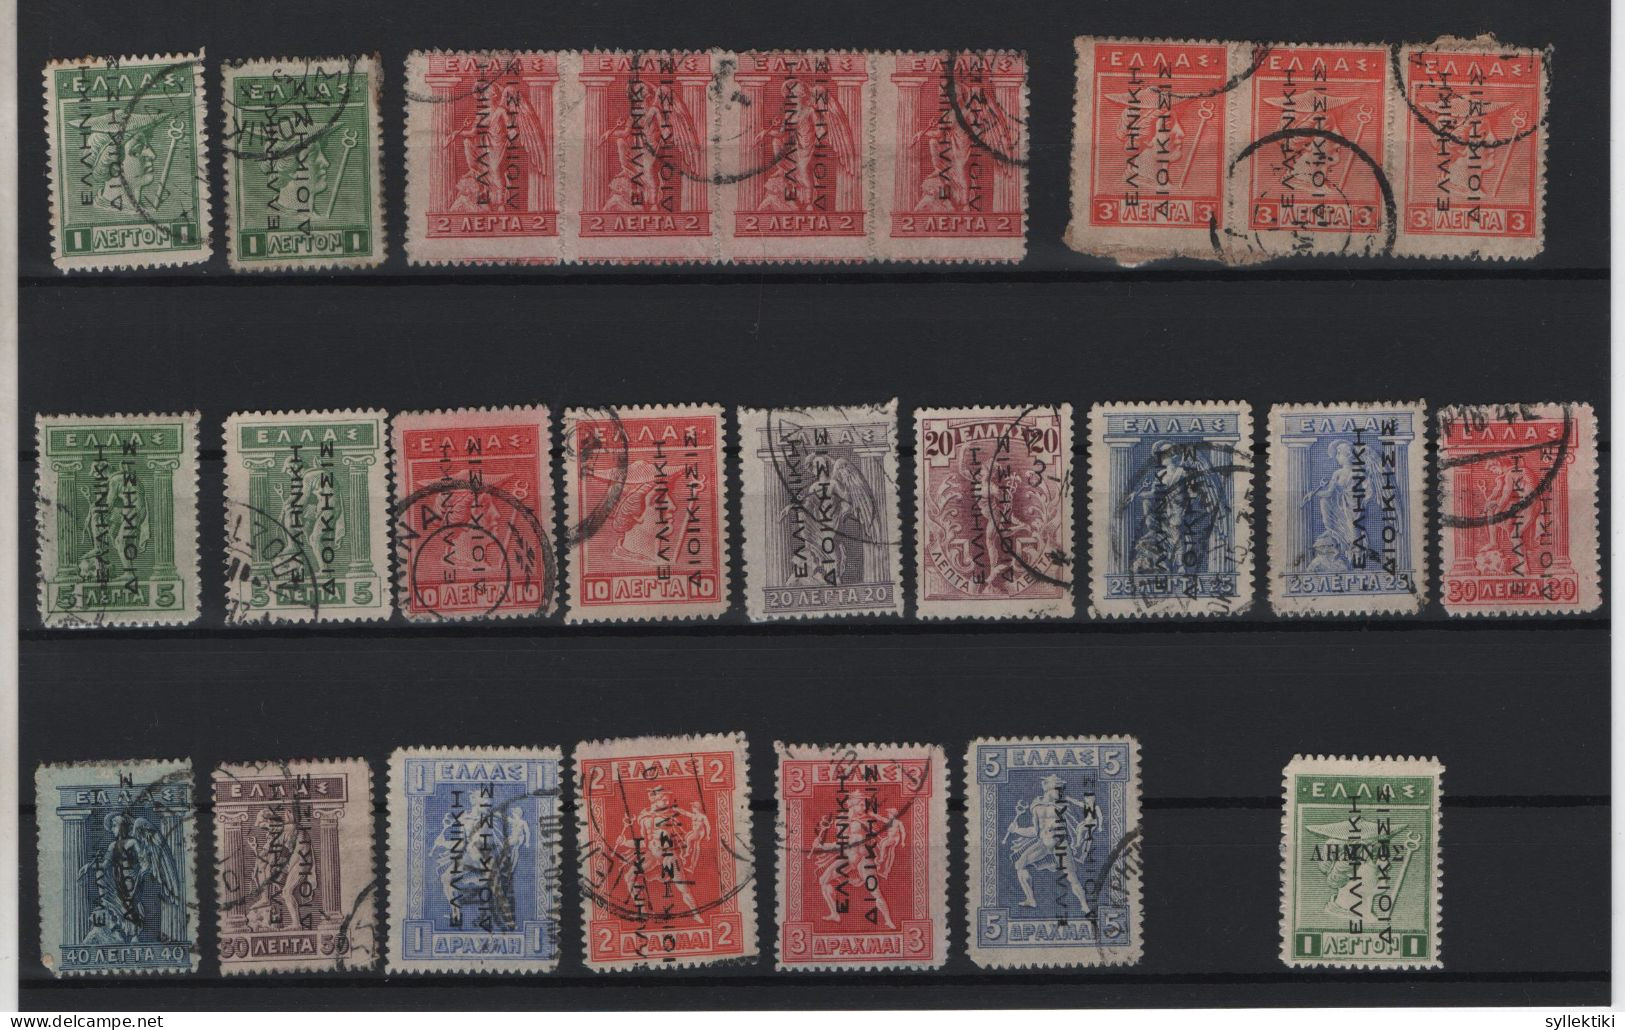 GREECE 1913 GREEK ADMIN READING UP 1 LEPTON - 5 DRACHMAS USED STAMPS (ONE IS MH)   HELLAS No 229 - 248 AND VALUE EURO 16 - Oblitérés